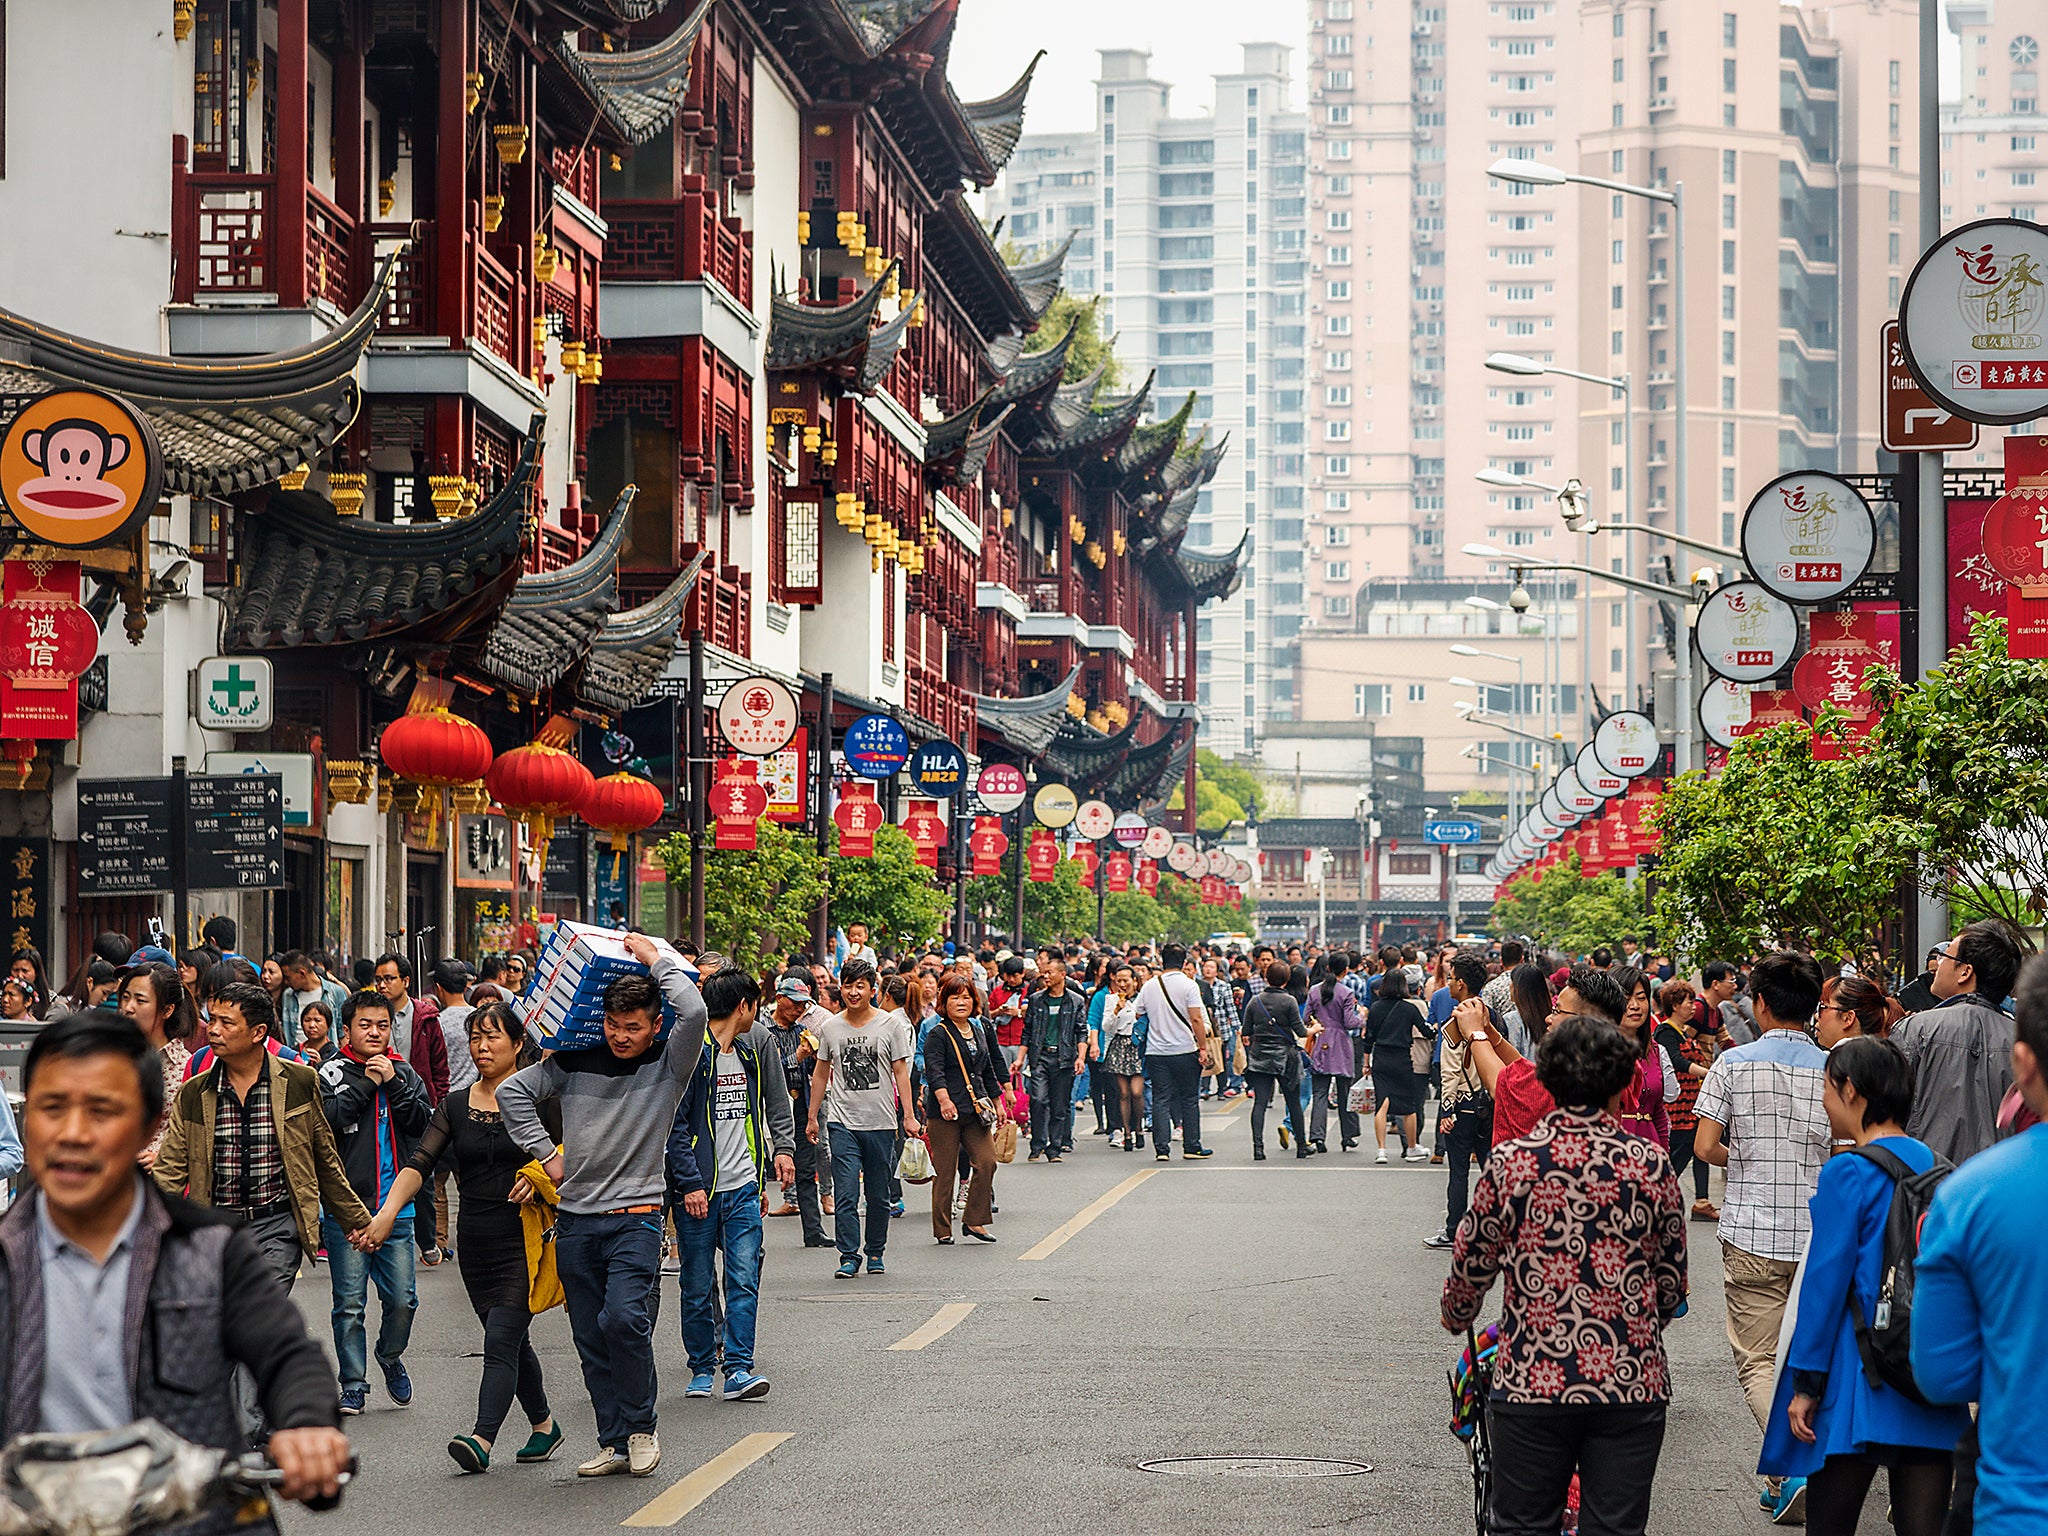 Shanghai old town: the population of China may have already been overtaken by India